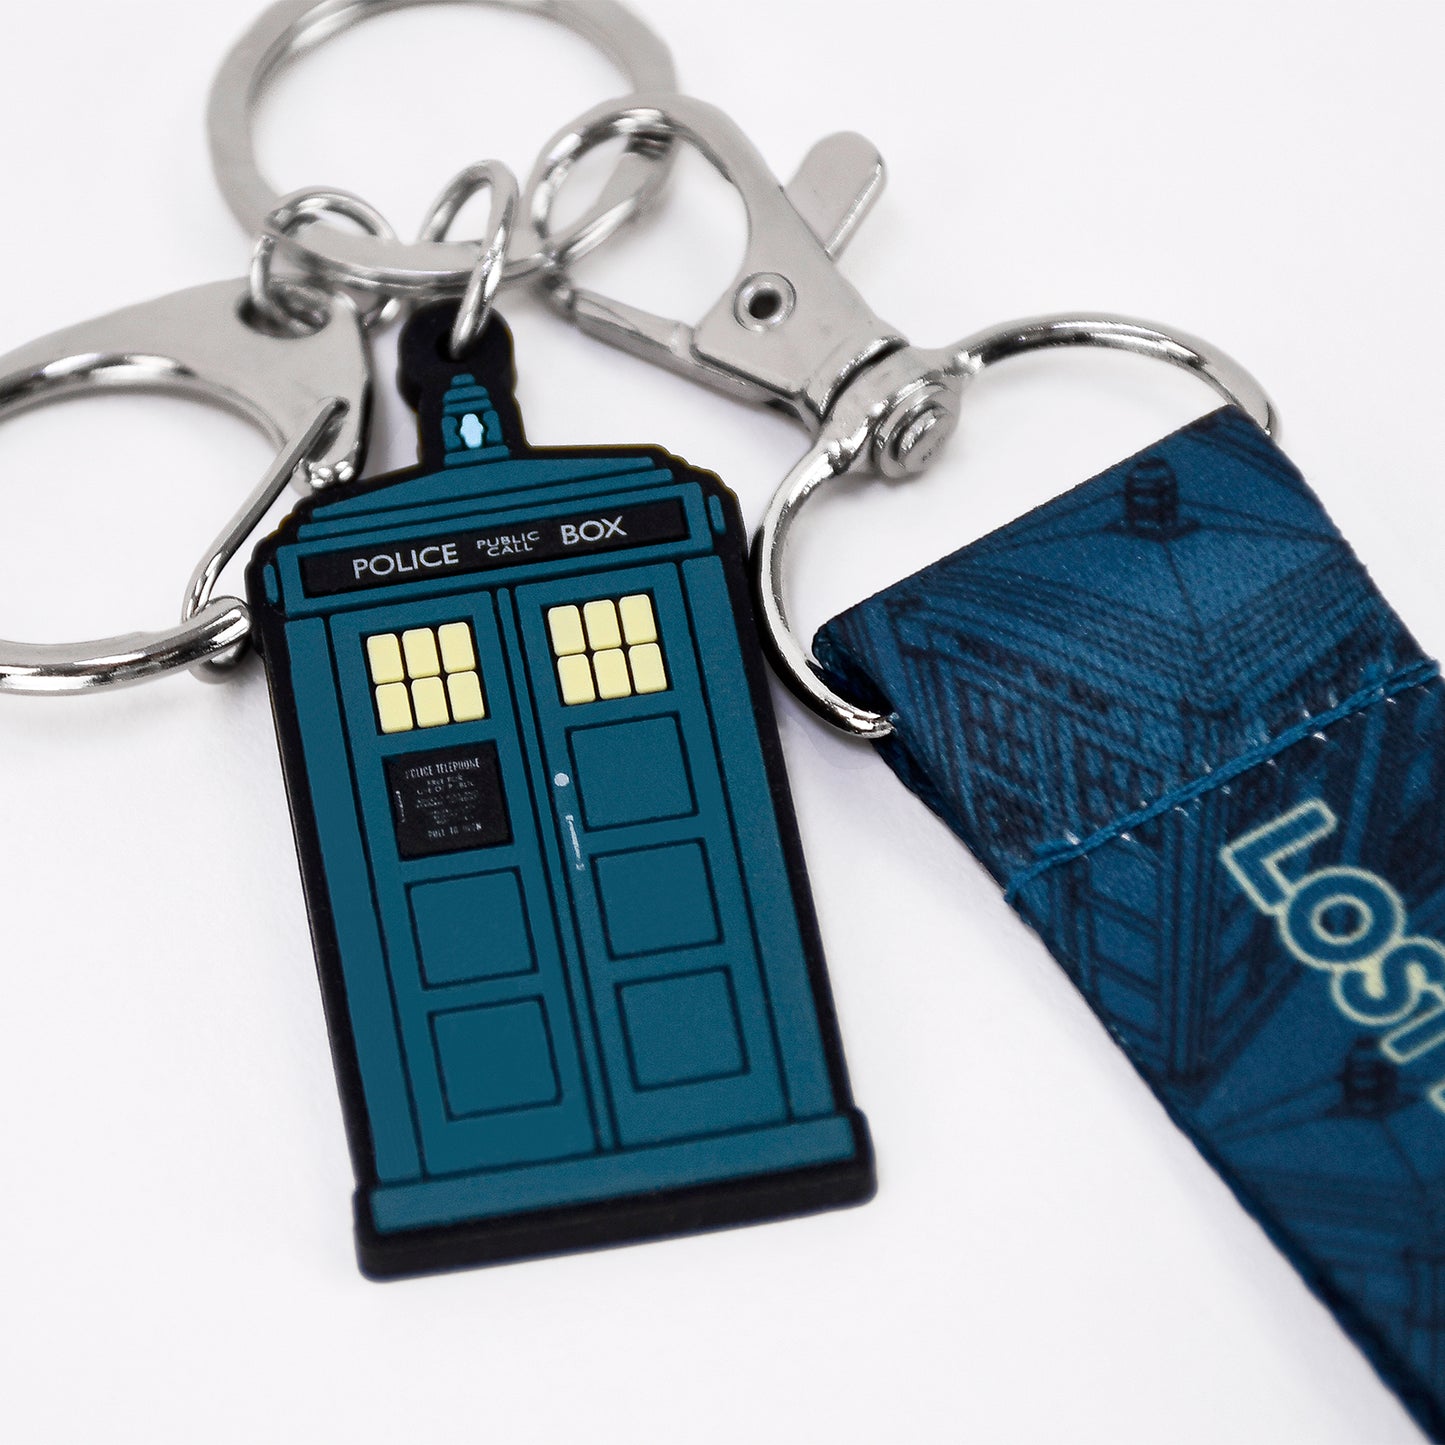 Doctor Who Rubber Keychain